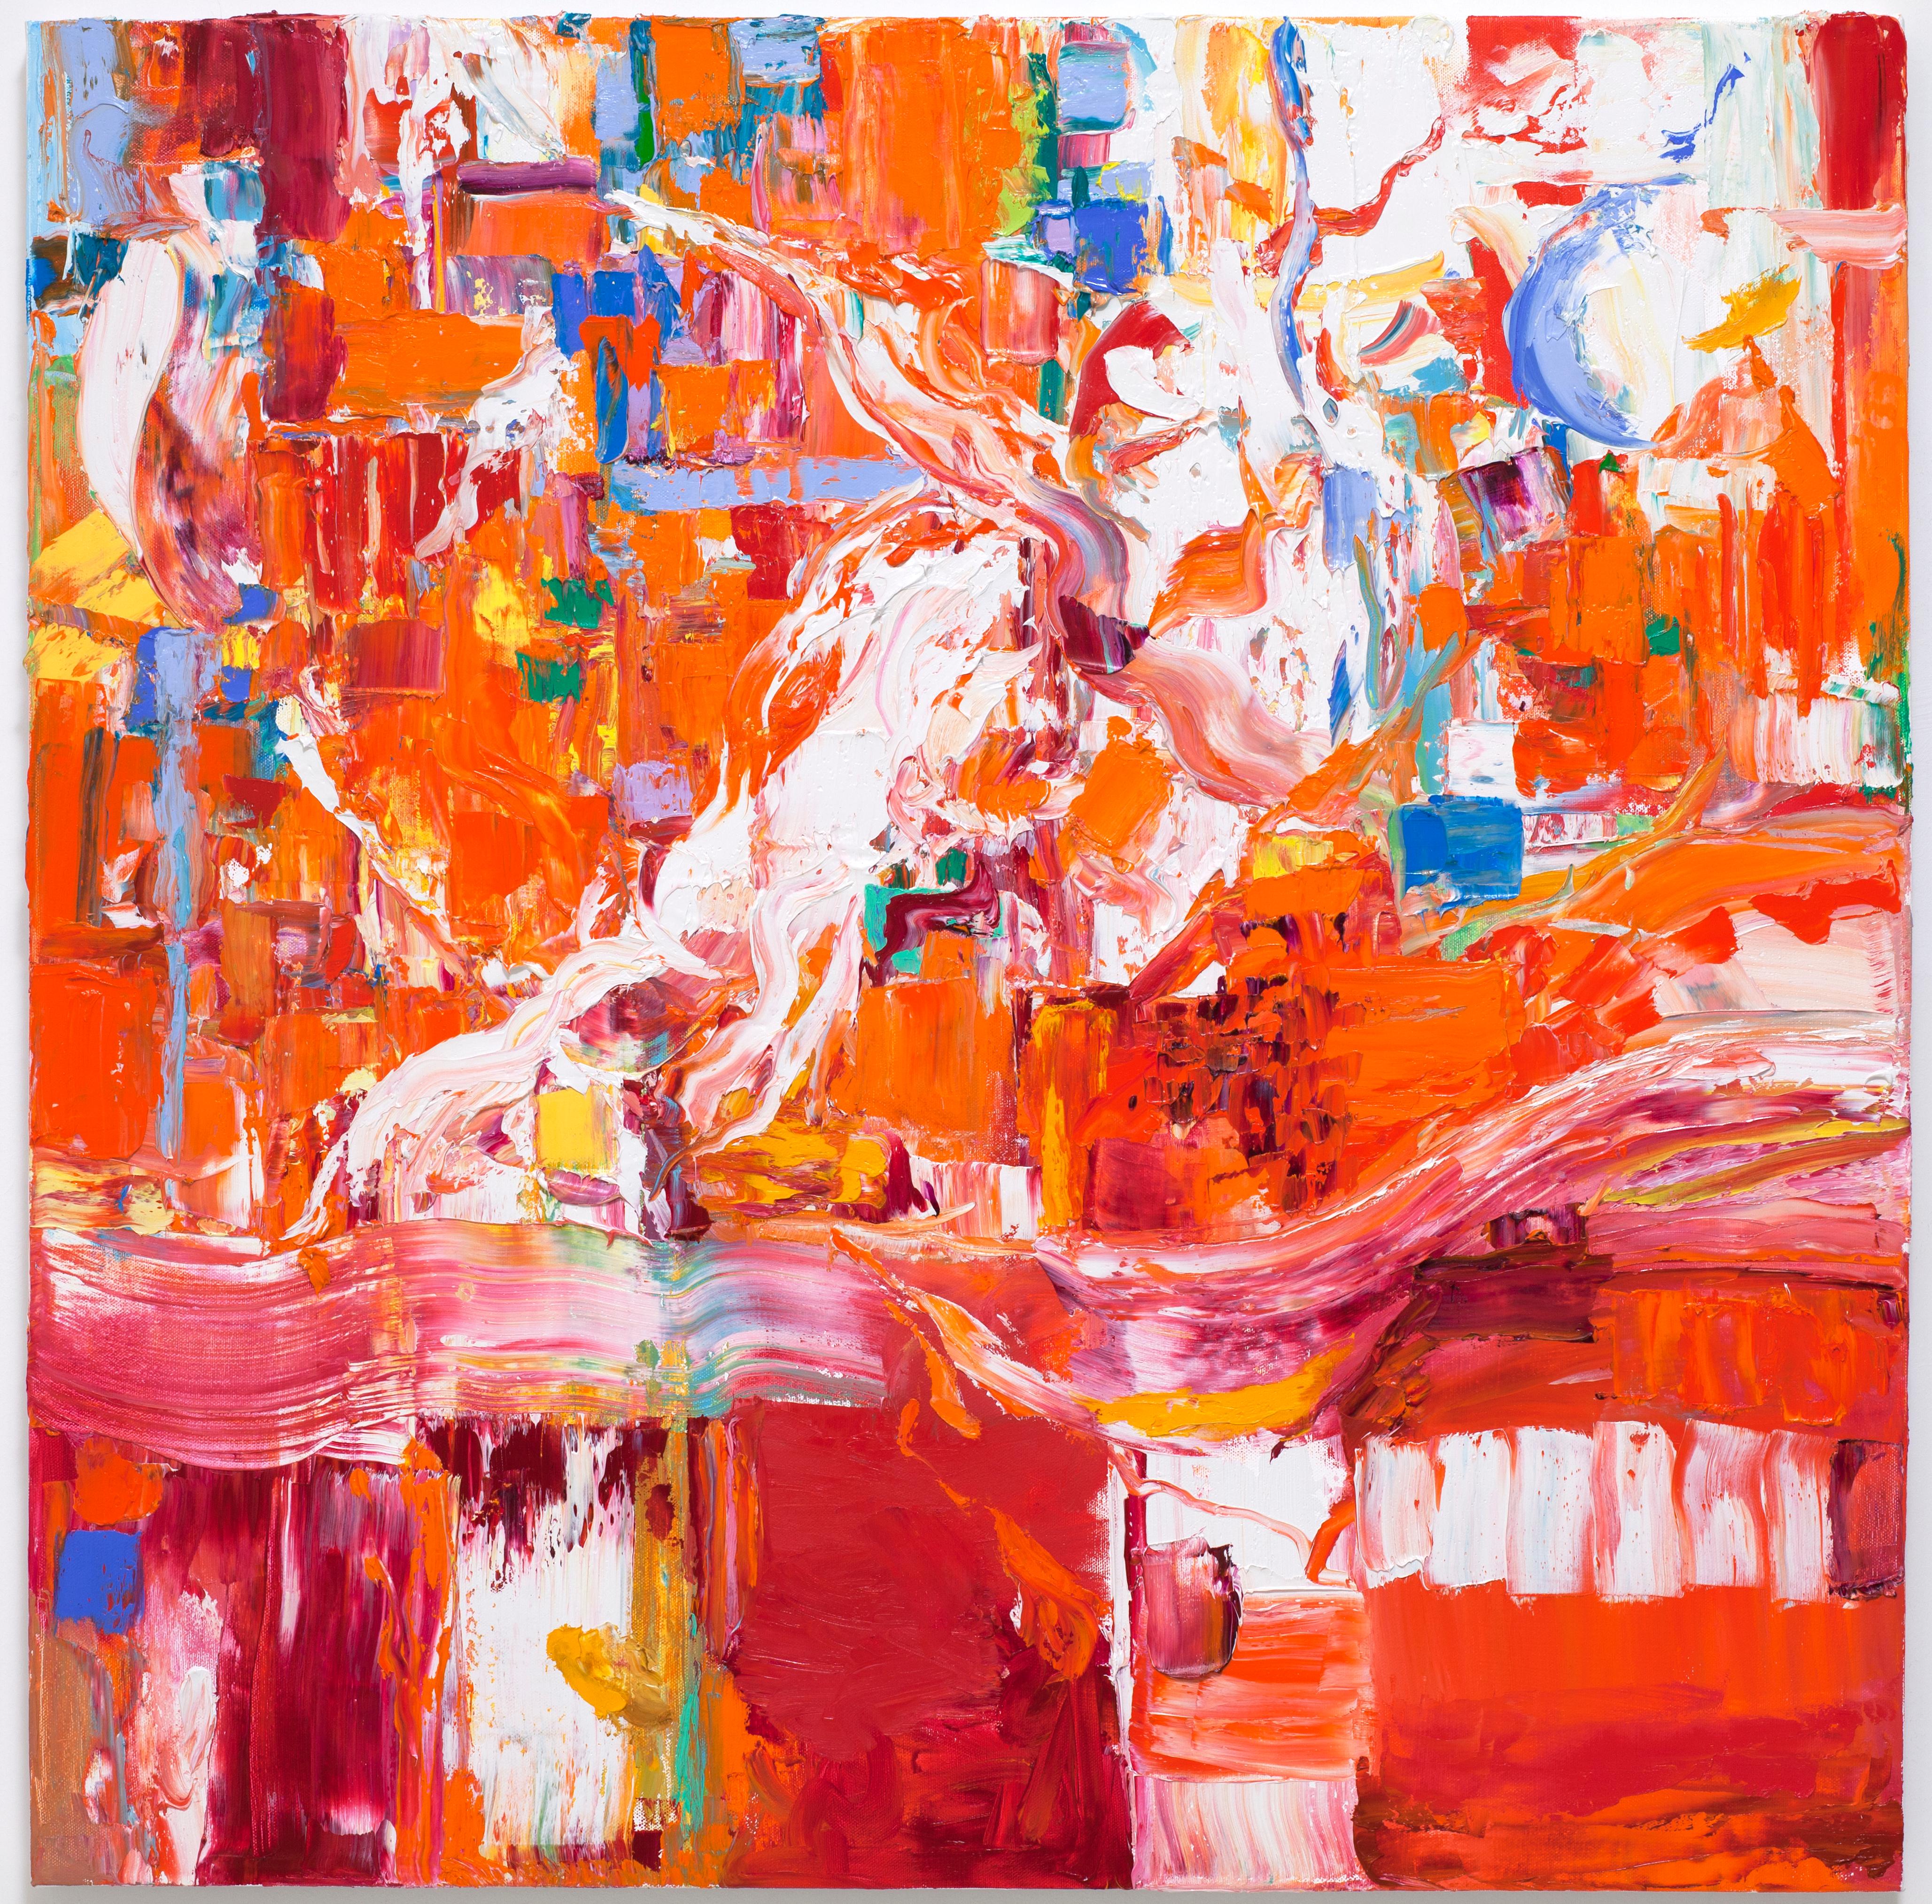 Linda Holt Abstract Painting - "Large Abstraction" Orange Red Expressionist Bold Colorful Oil Paint